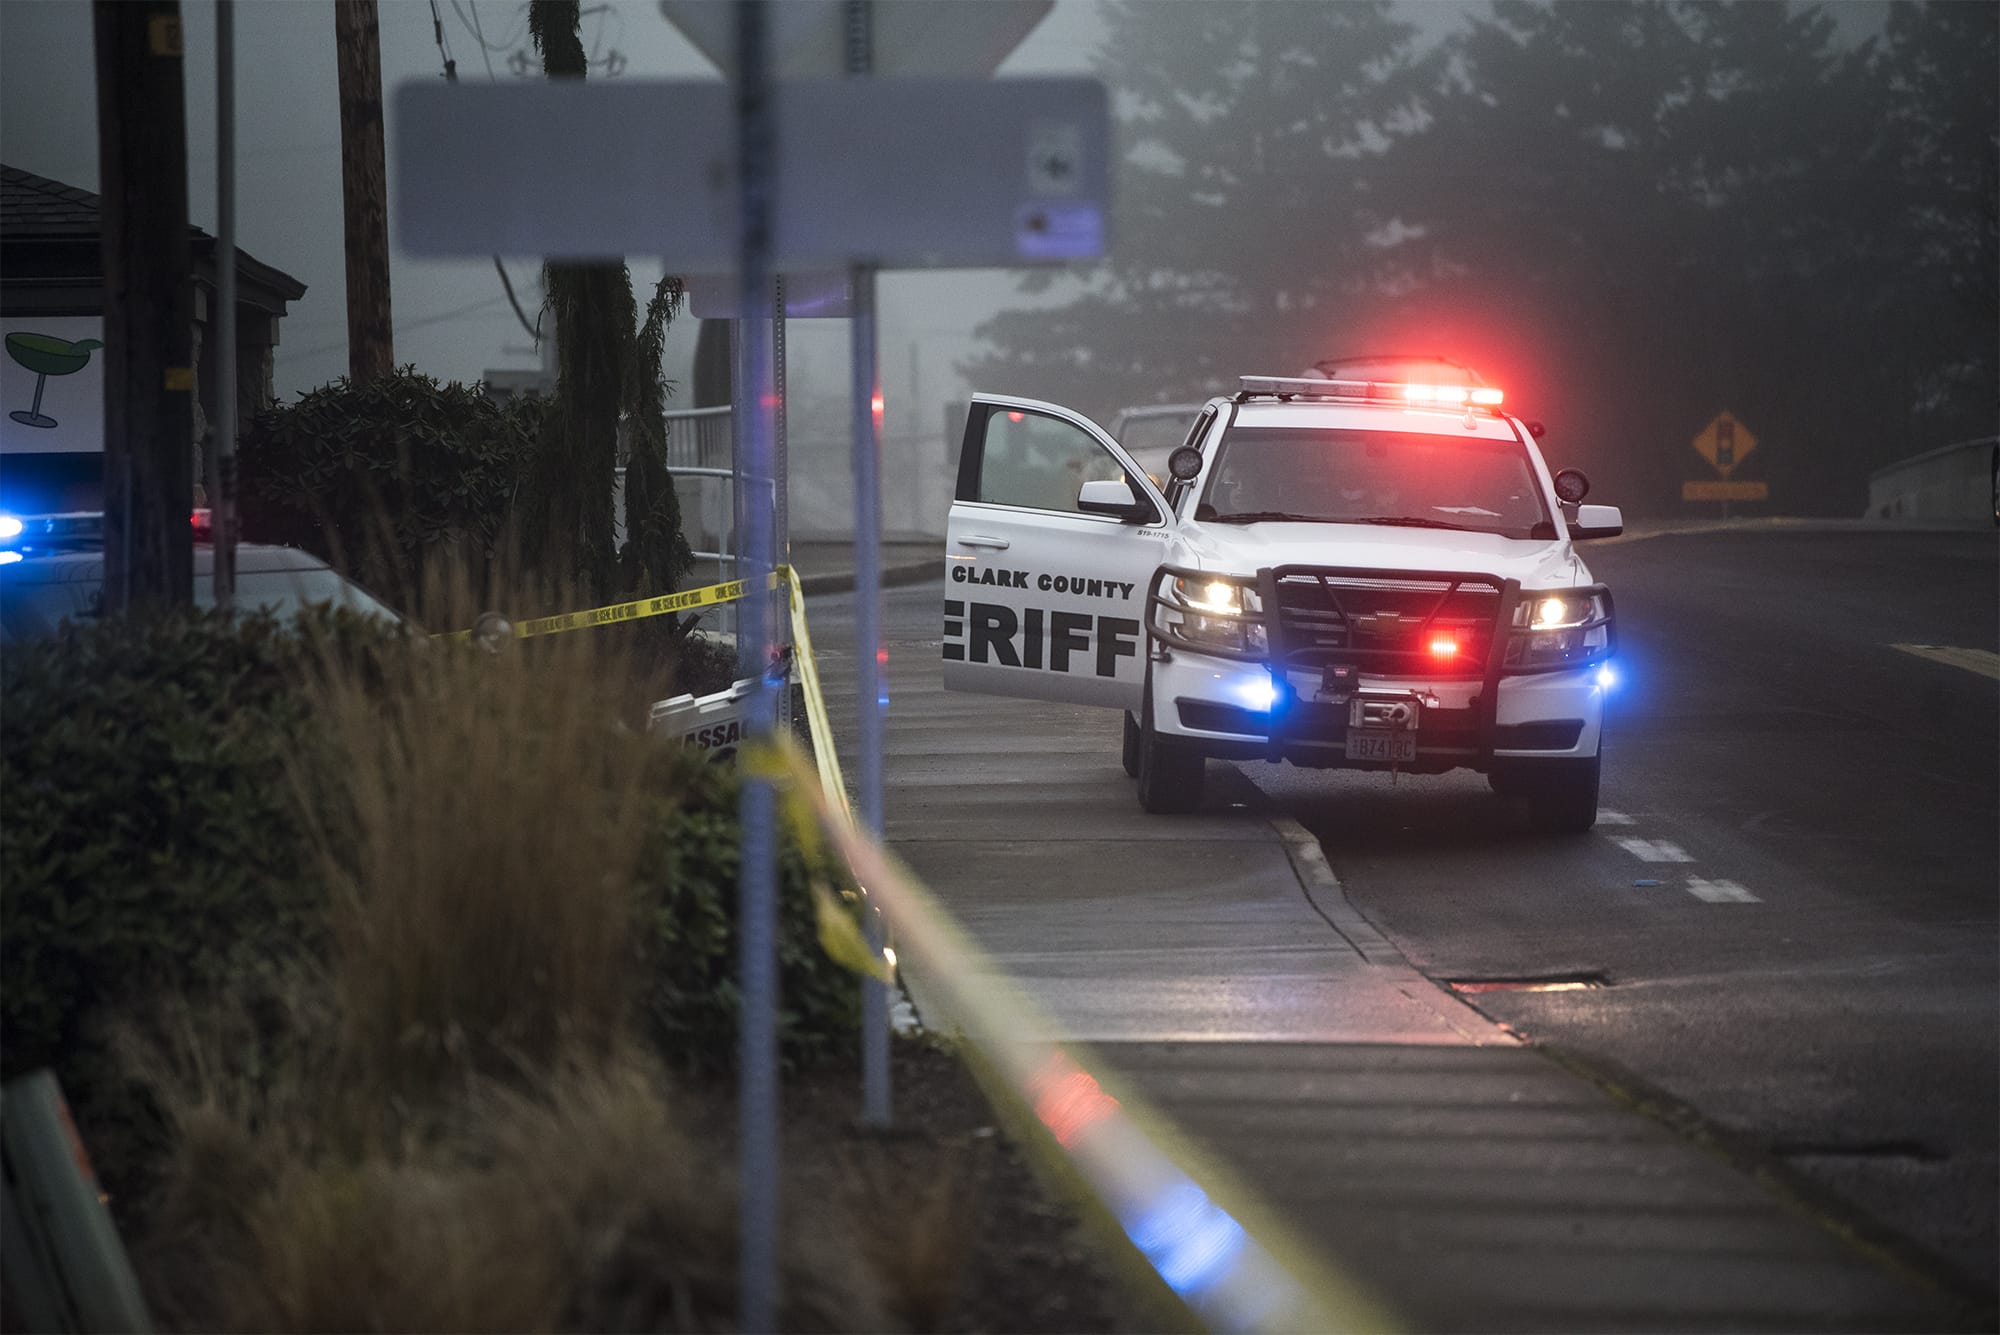 A Clark County Sheriff's cruiser is seen here at Pacific 63 Center following a fatal shooting in Hazel Dell on Monday afternoon, Dec. 10, 2018.